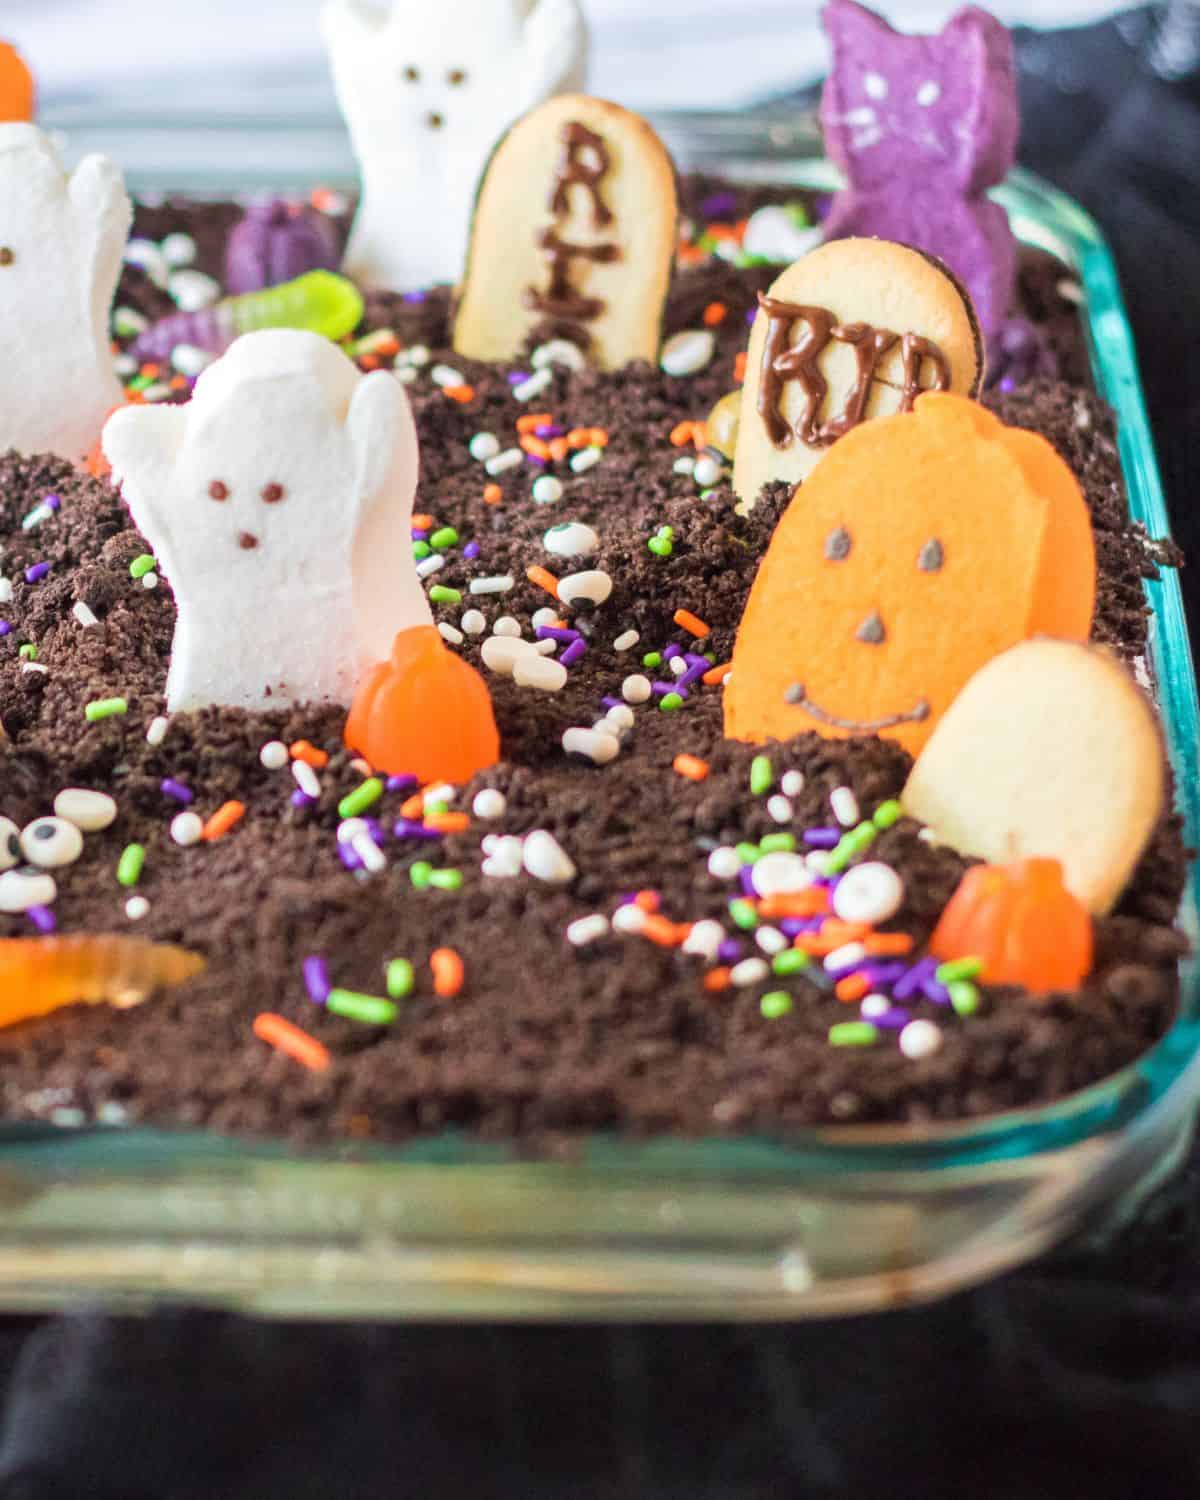 A Halloween cake decorated with marshmallow ghosts, pumpkins, and cemetery cookies